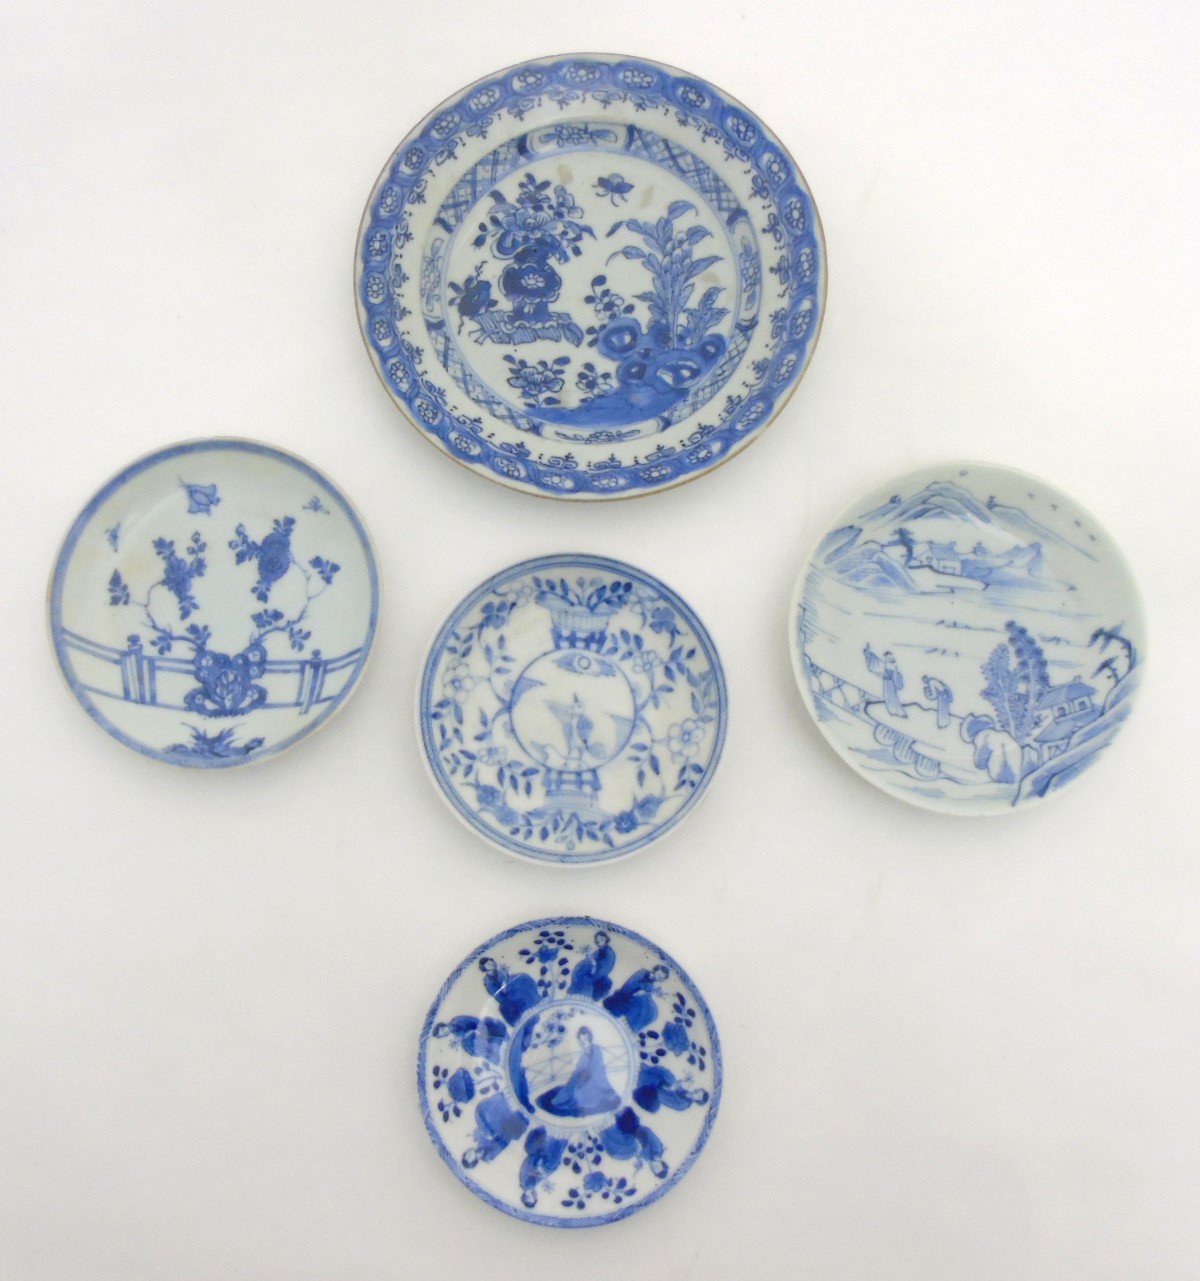 Five Chinese blue and white plates: A blue and white plate depicting butterflies and peonies on a - Image 6 of 15